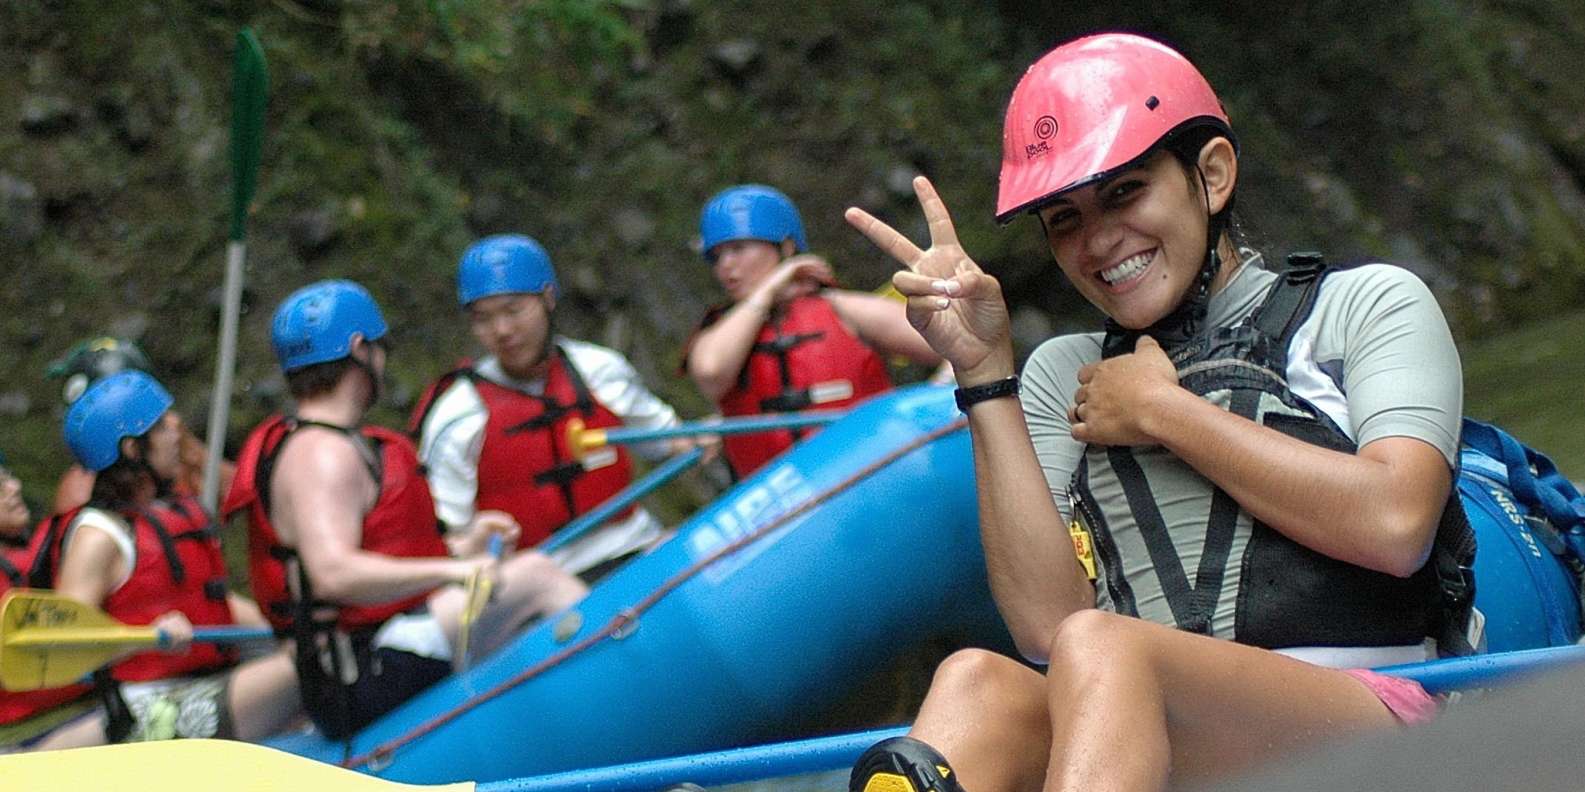 Rafting Gift Certificates - American Whitewater Expeditions